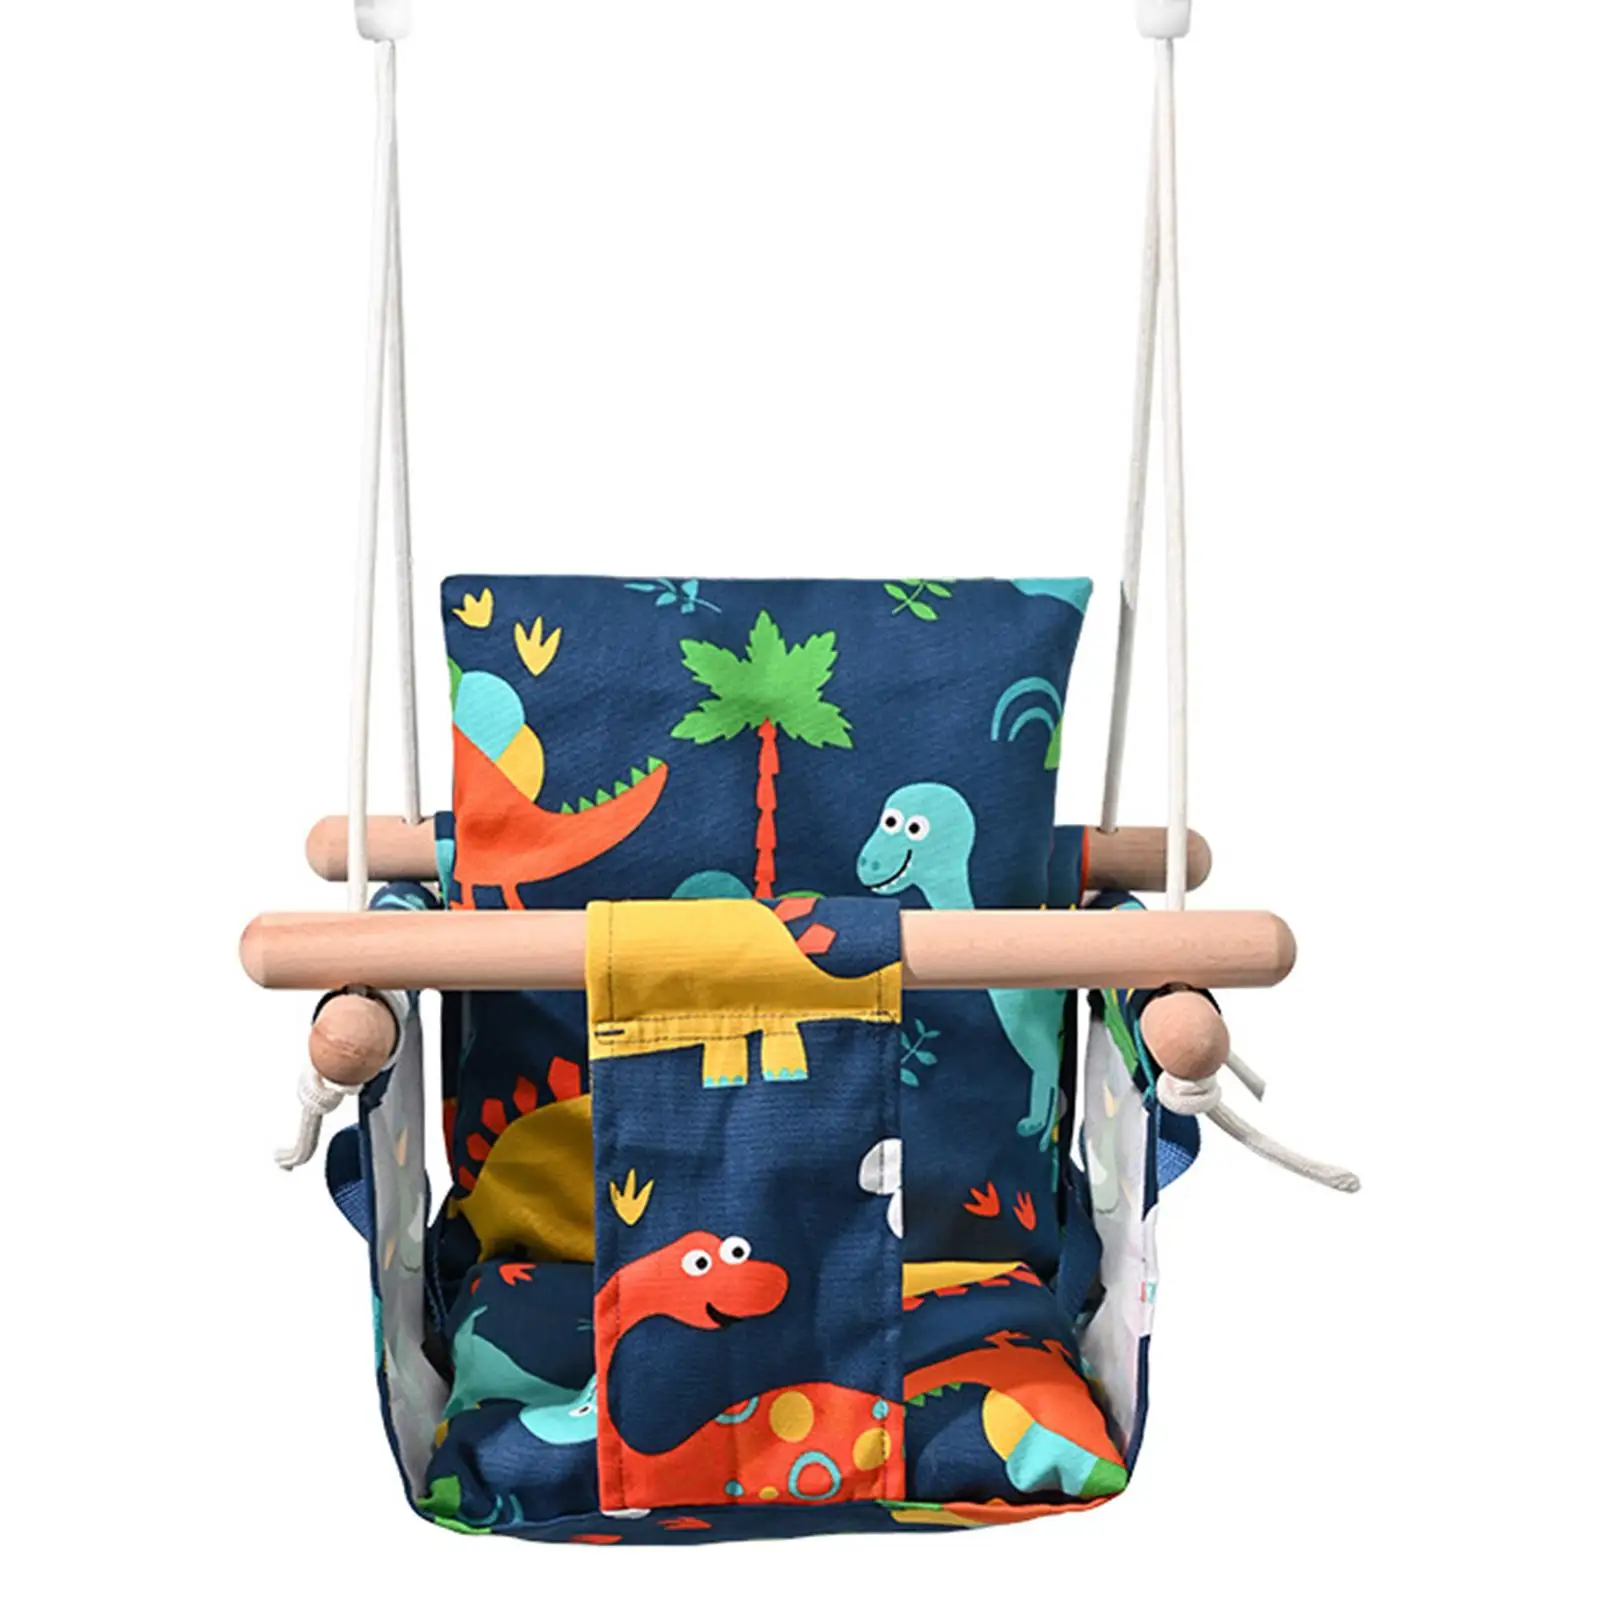 Classic Baby Hanging Swing Chair Swinging Rocking Chair for Kindergarten Toy